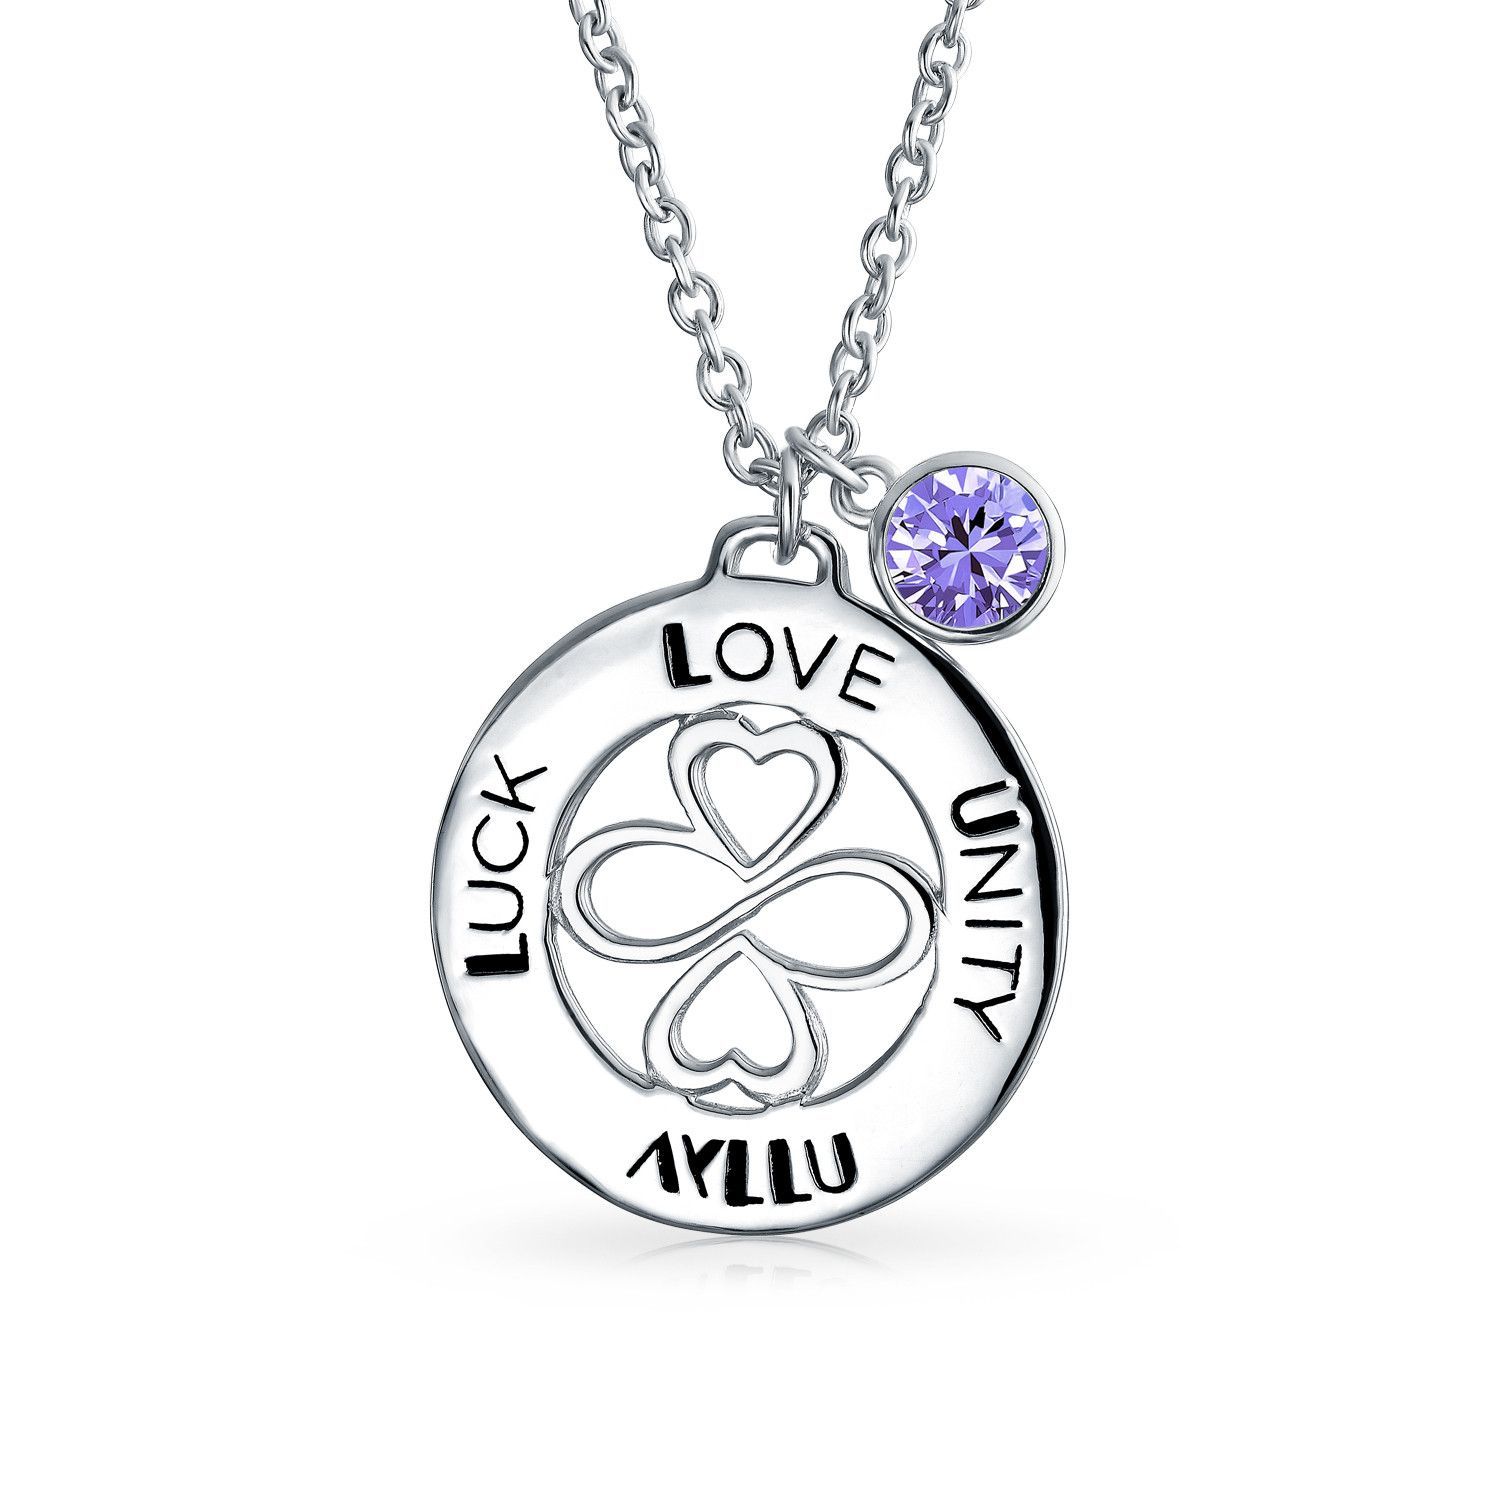 Ayllu Symbol Inspirational Round Disc Bff Pendant Necklace For Women For 2019 Shimmering Knot Locket Element Necklaces (View 13 of 25)